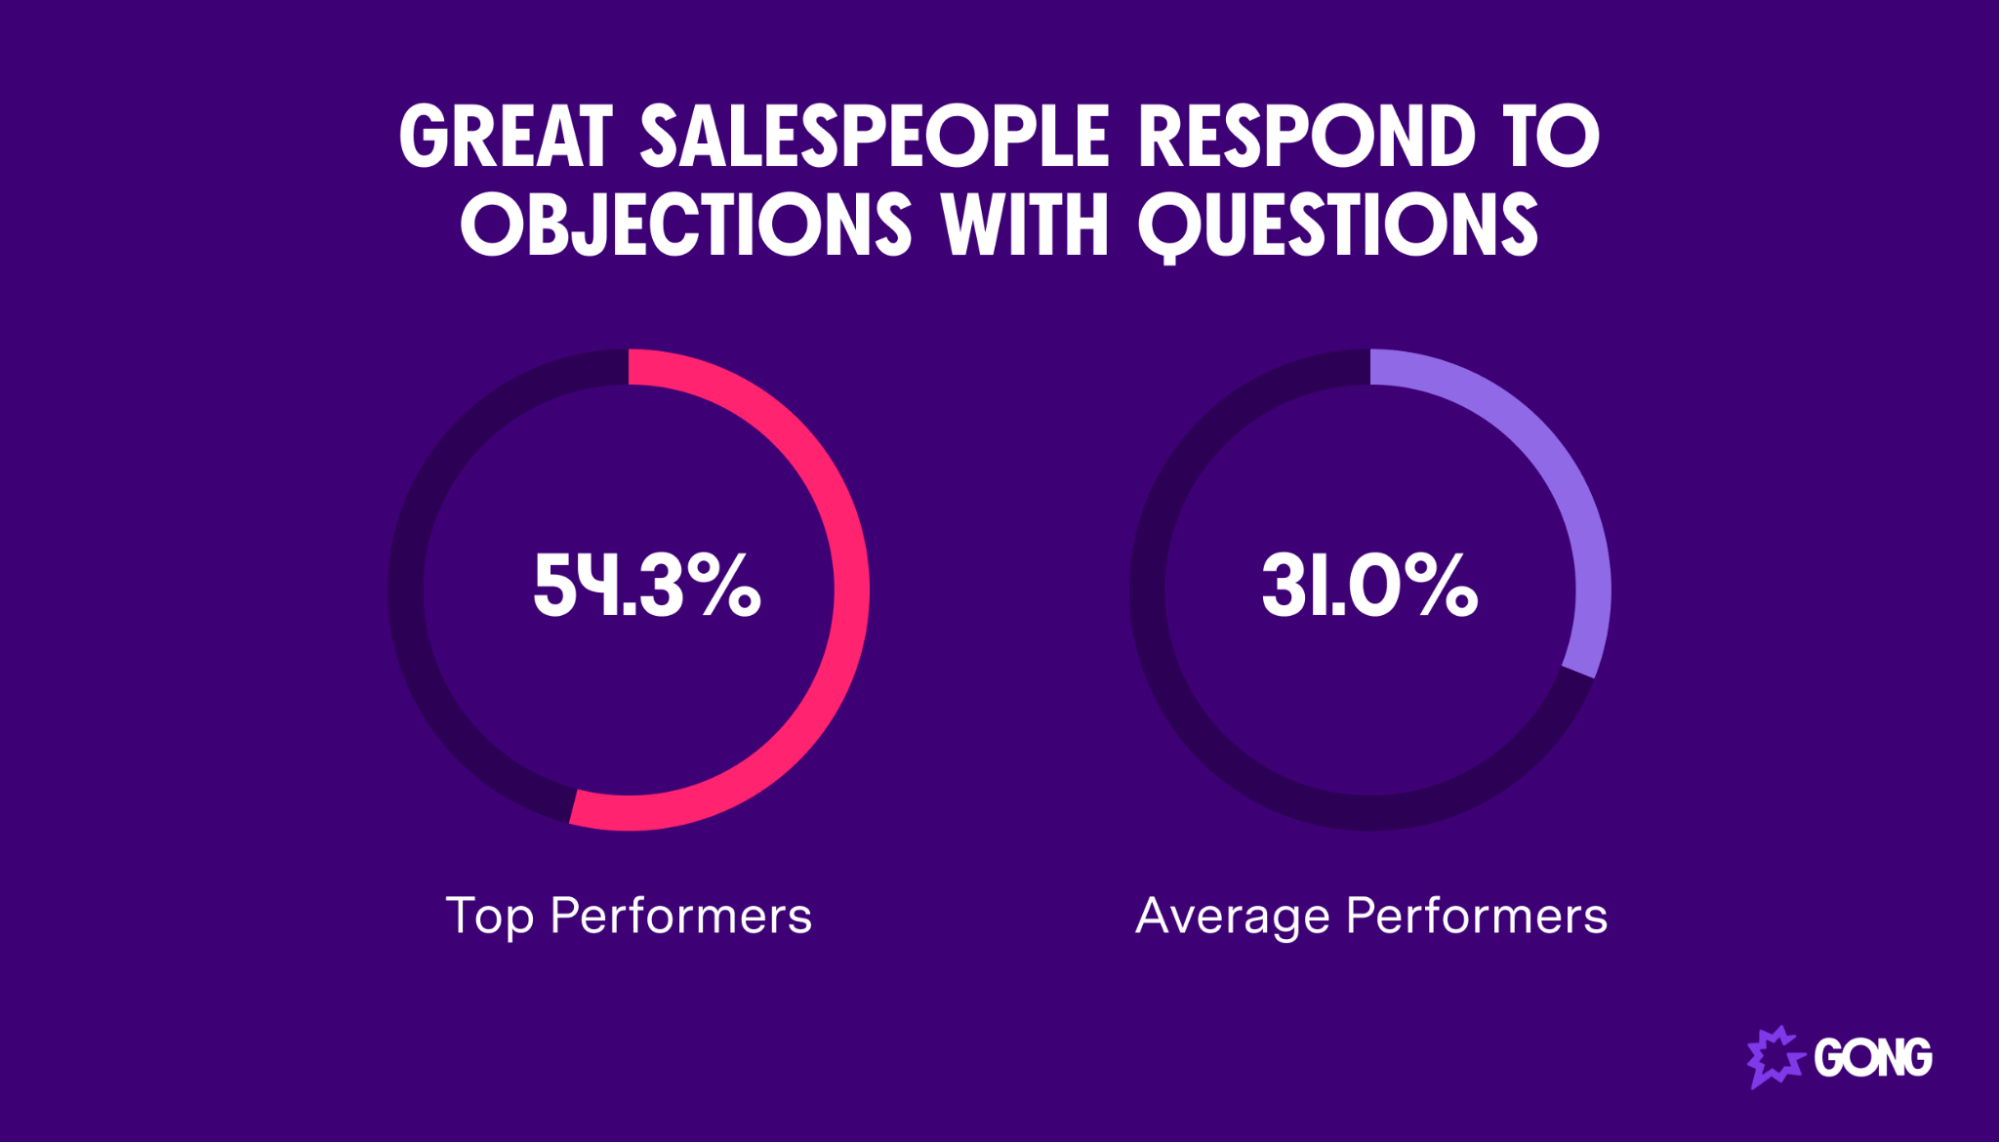 Great salespeople respond to objections with questions